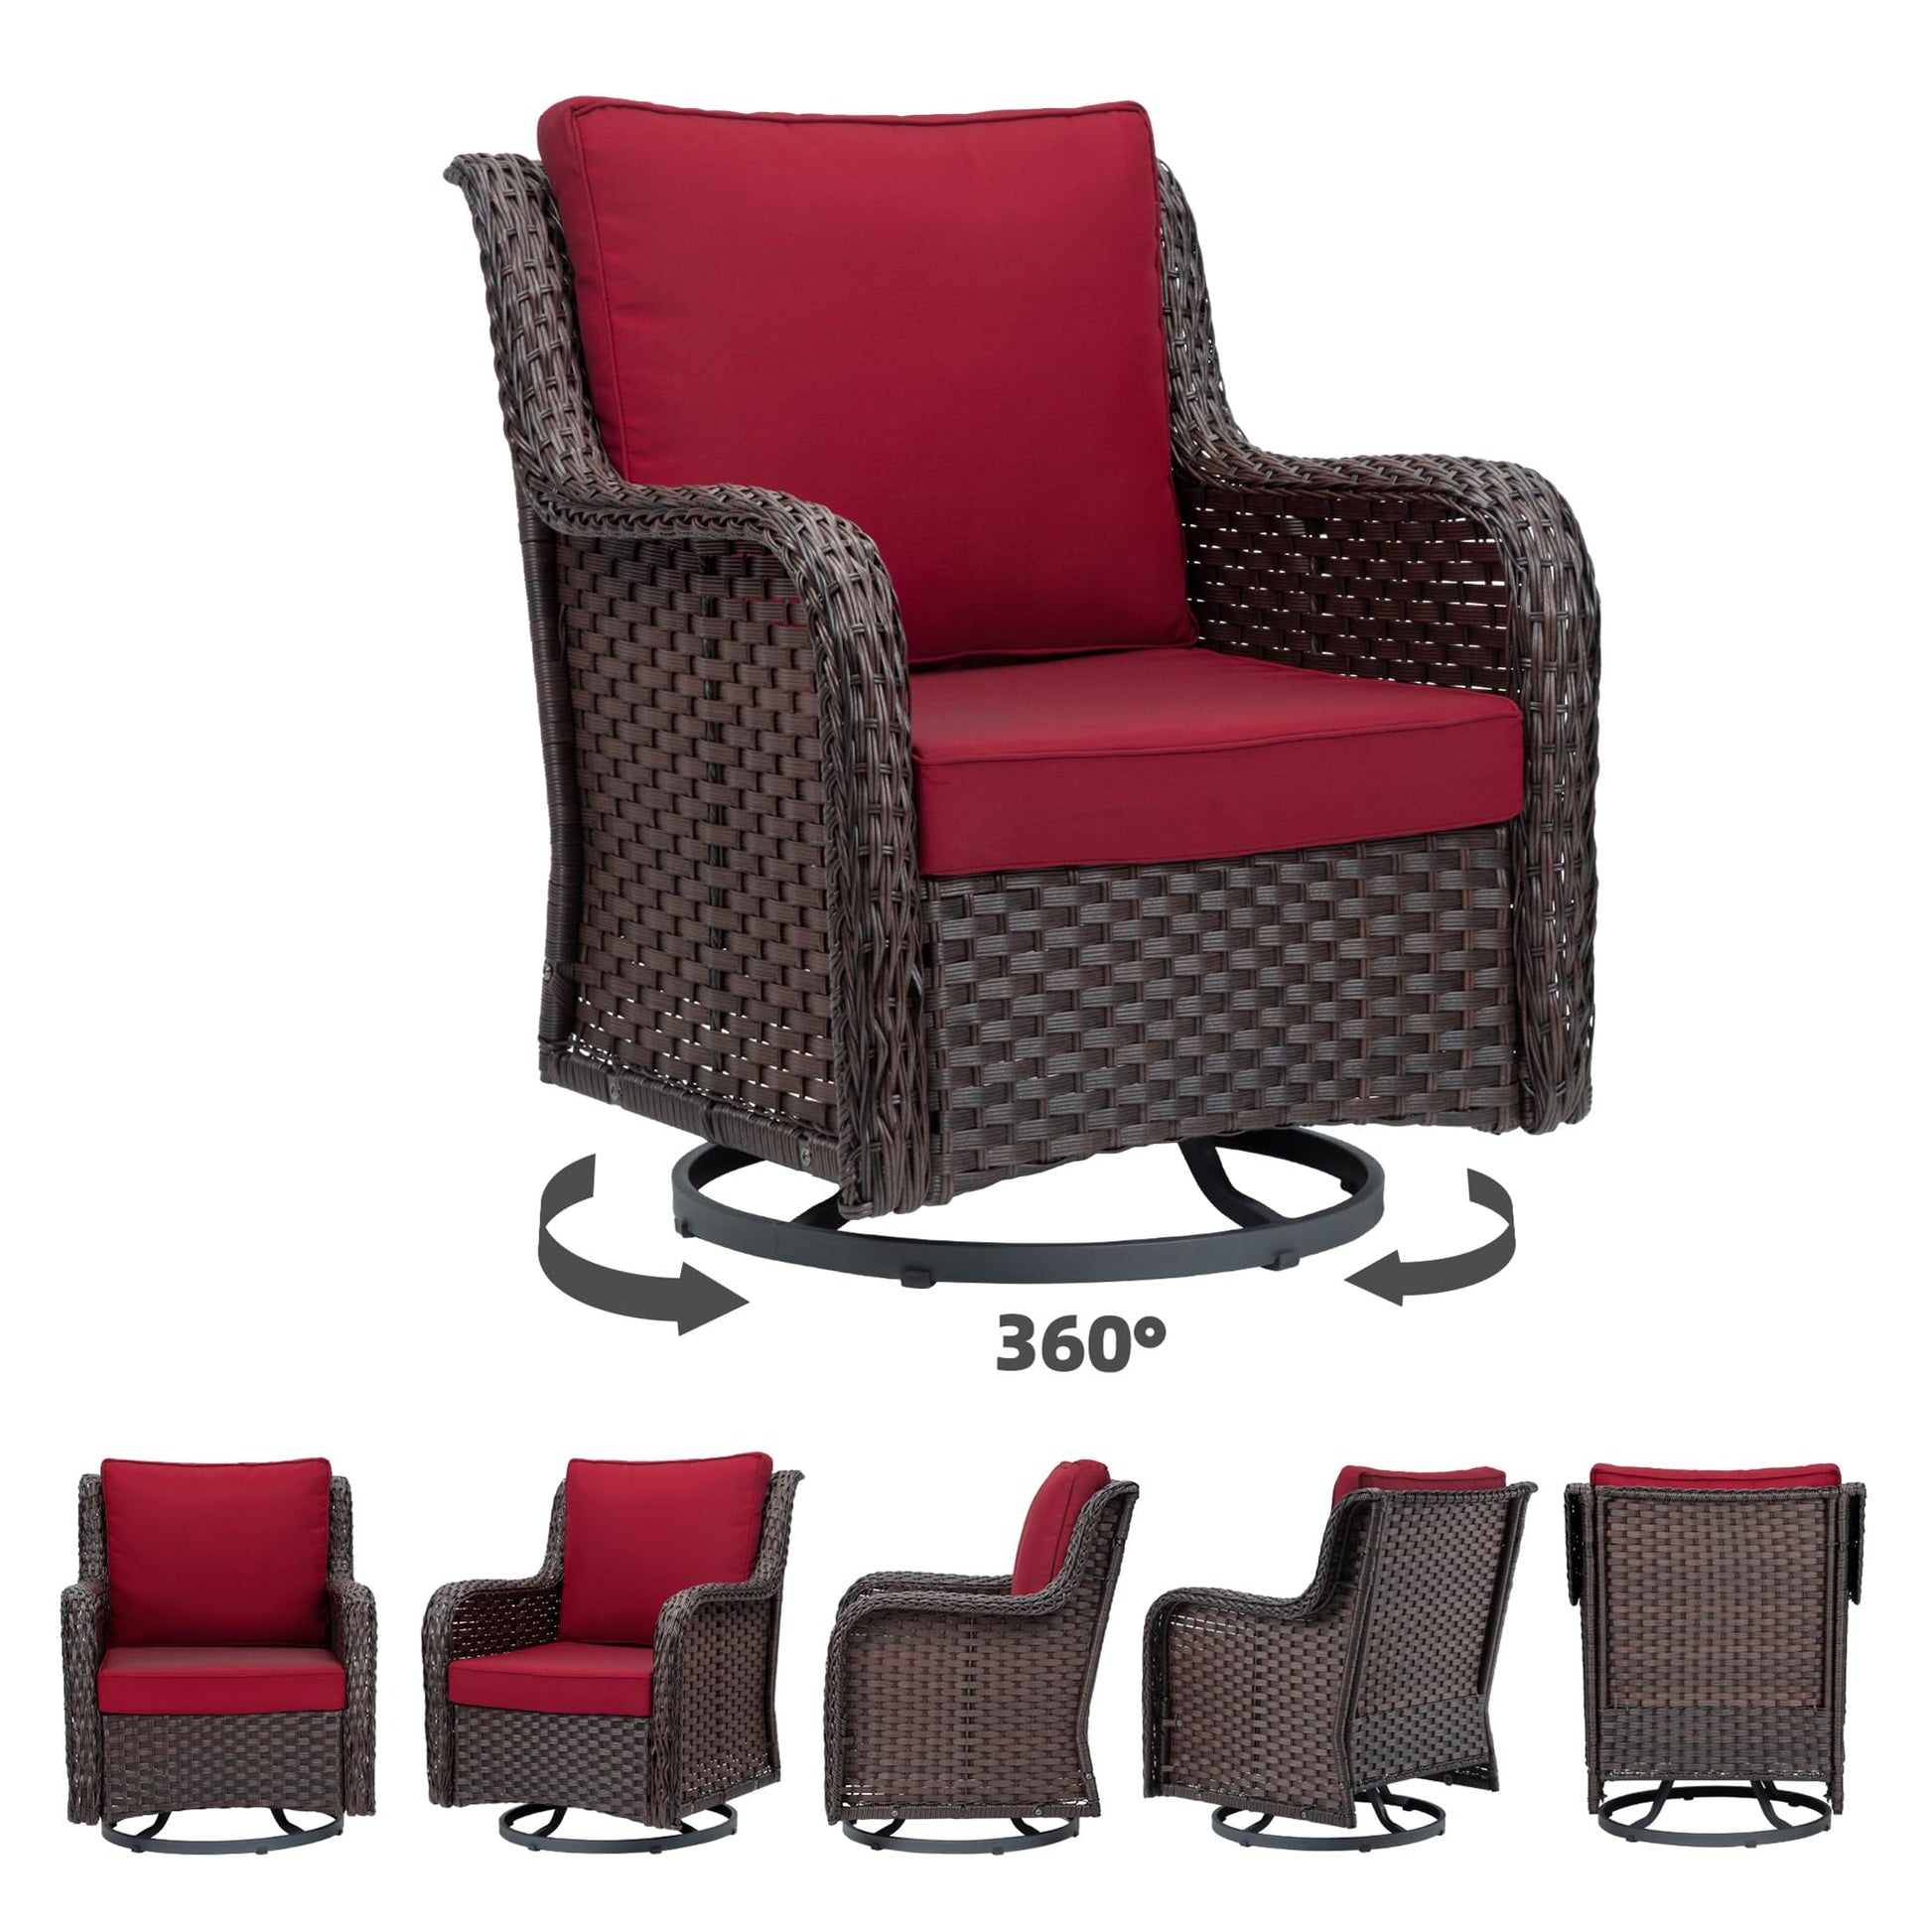 3 Pieces Rattan Swivel Rocking Chair Outdoor, Patio Bistro Conversation Furniture Set, Wicker Chair with Cushions and Table